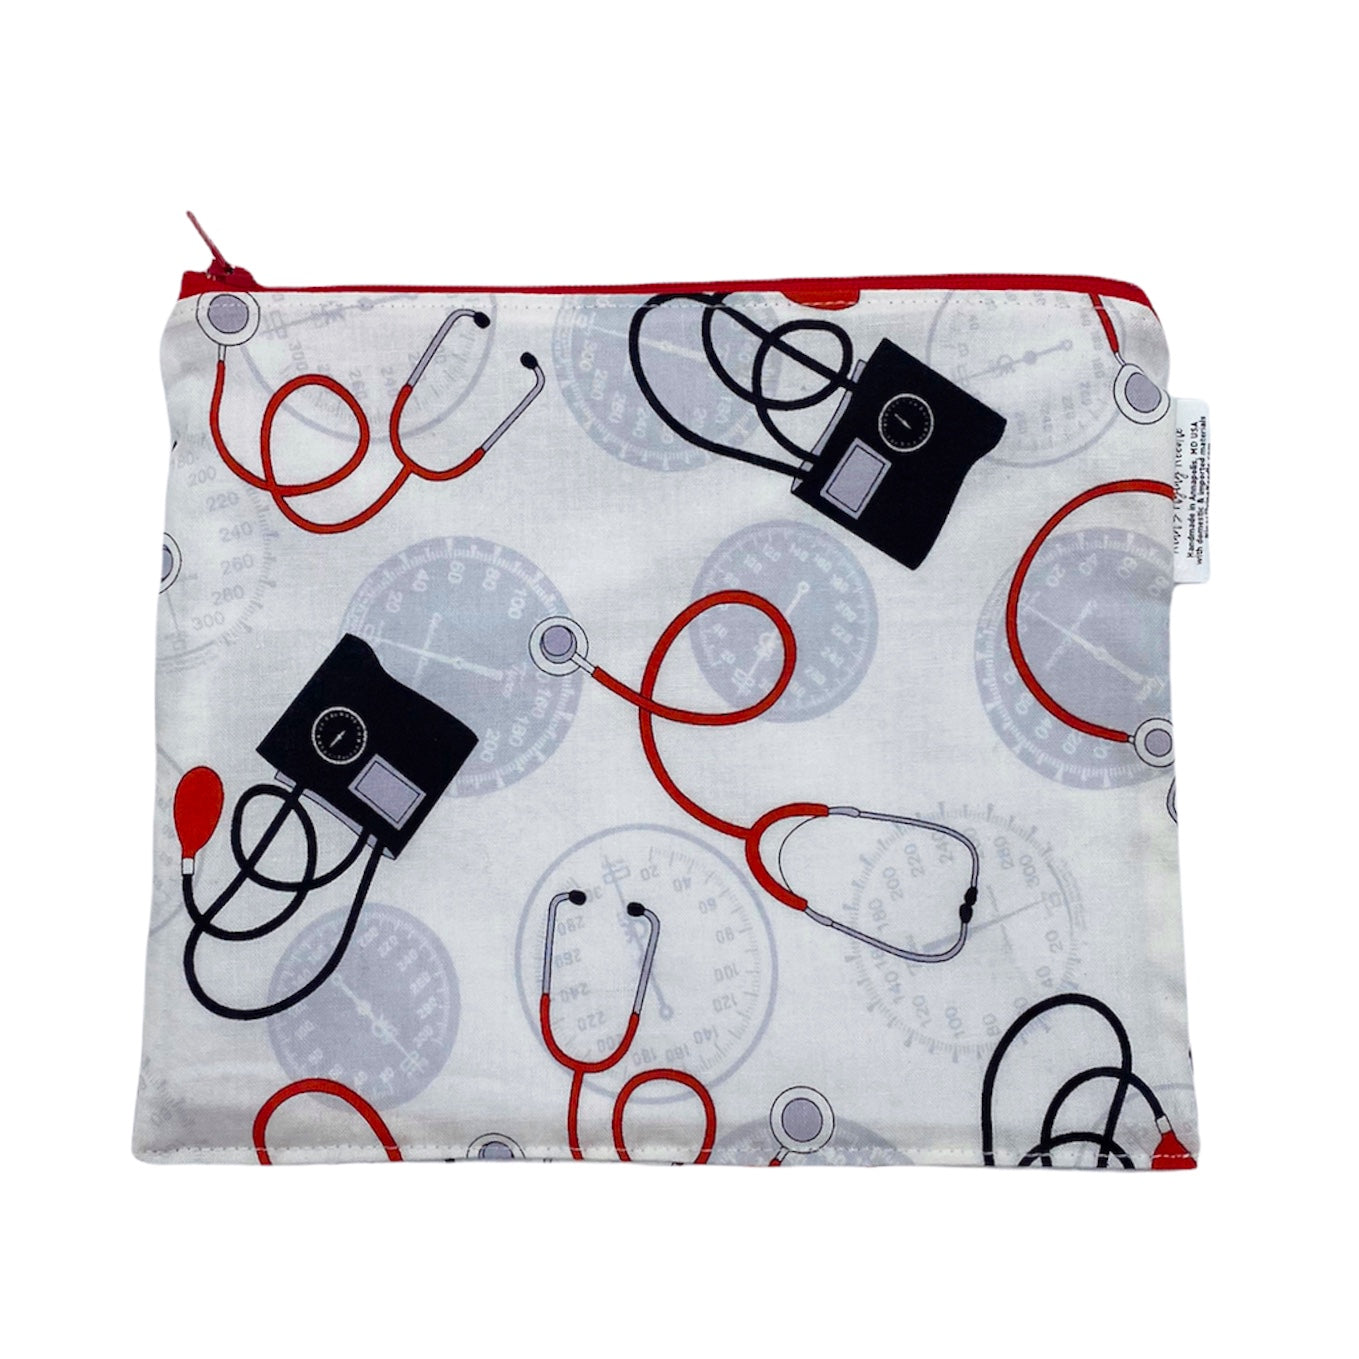 Small Sized Wet Bag Medical Print